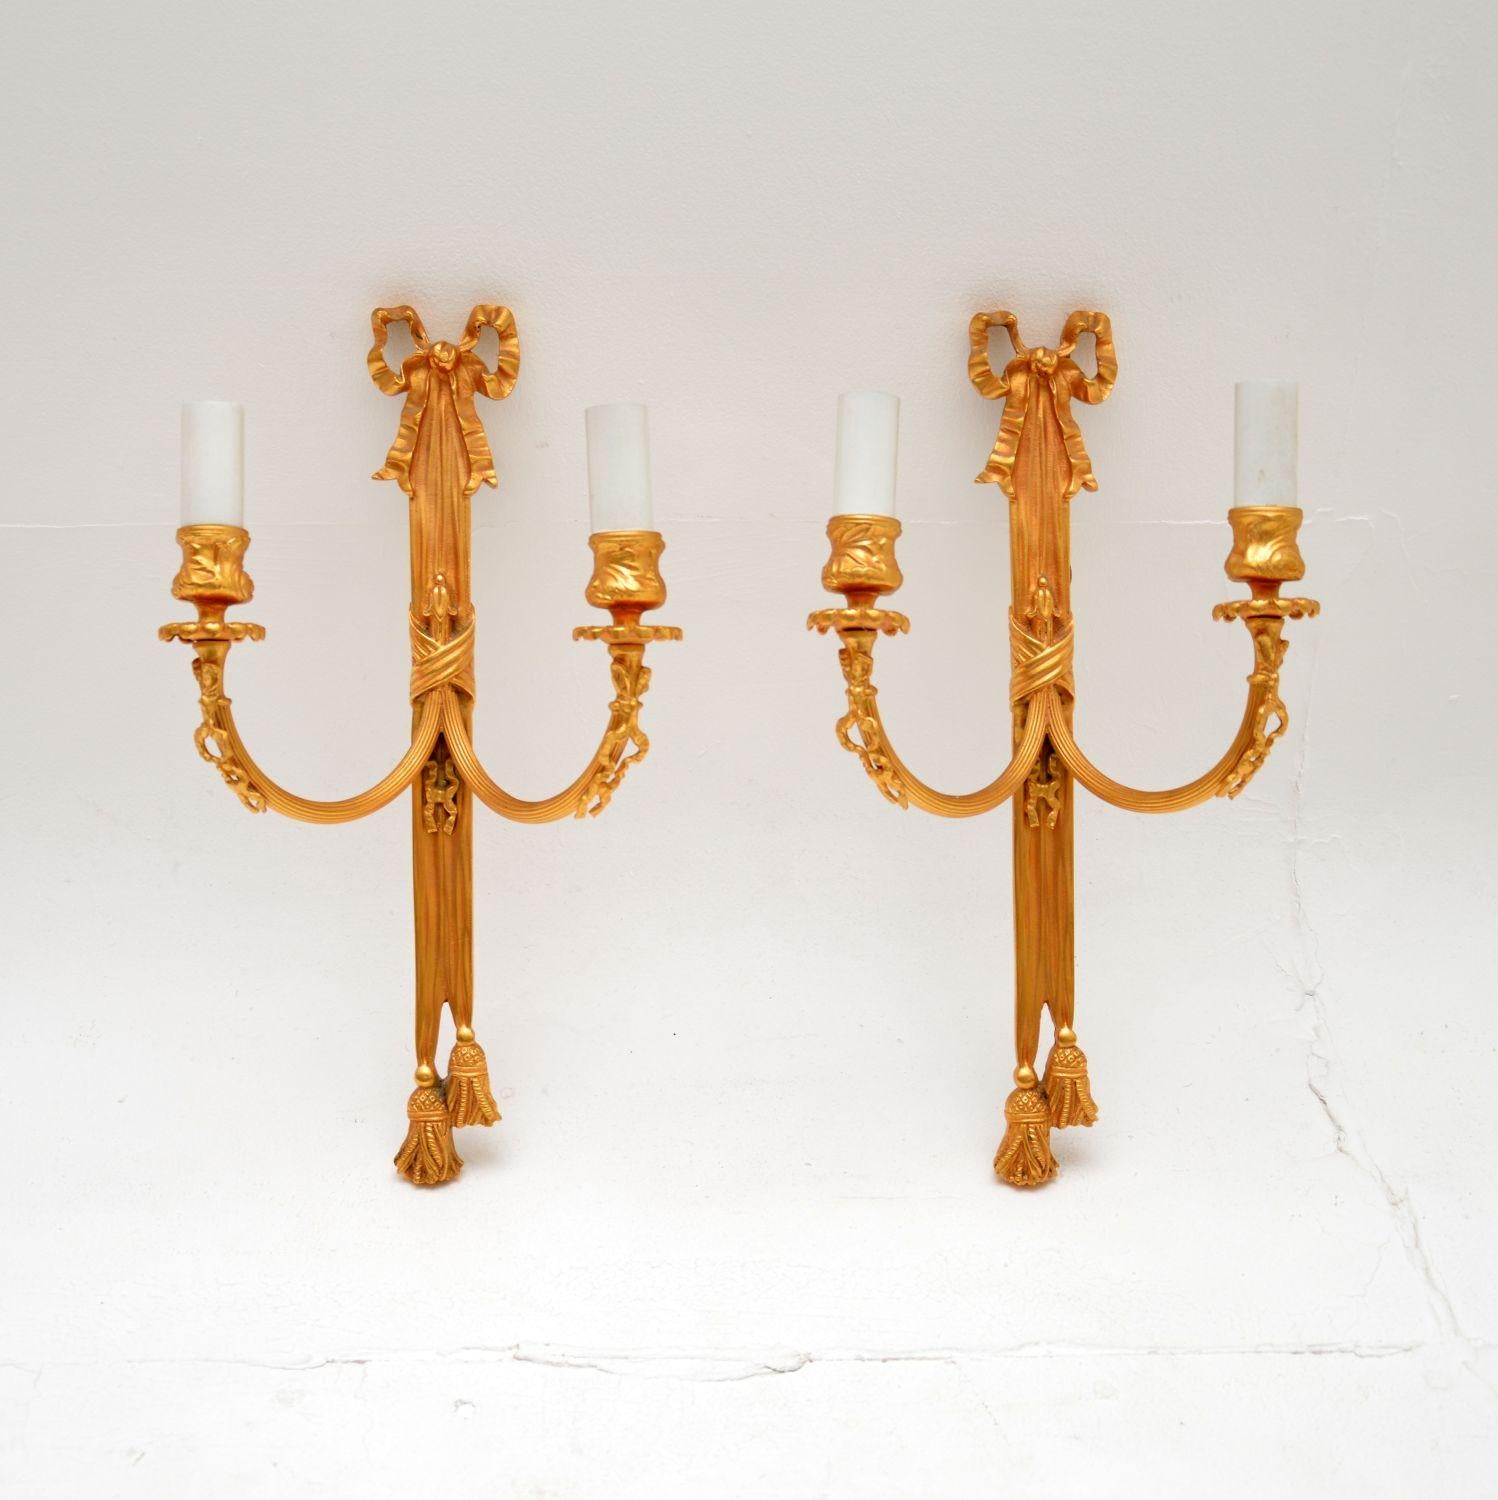 British Set of Four Antique Gilt Metal Wall Sconce Lamps For Sale